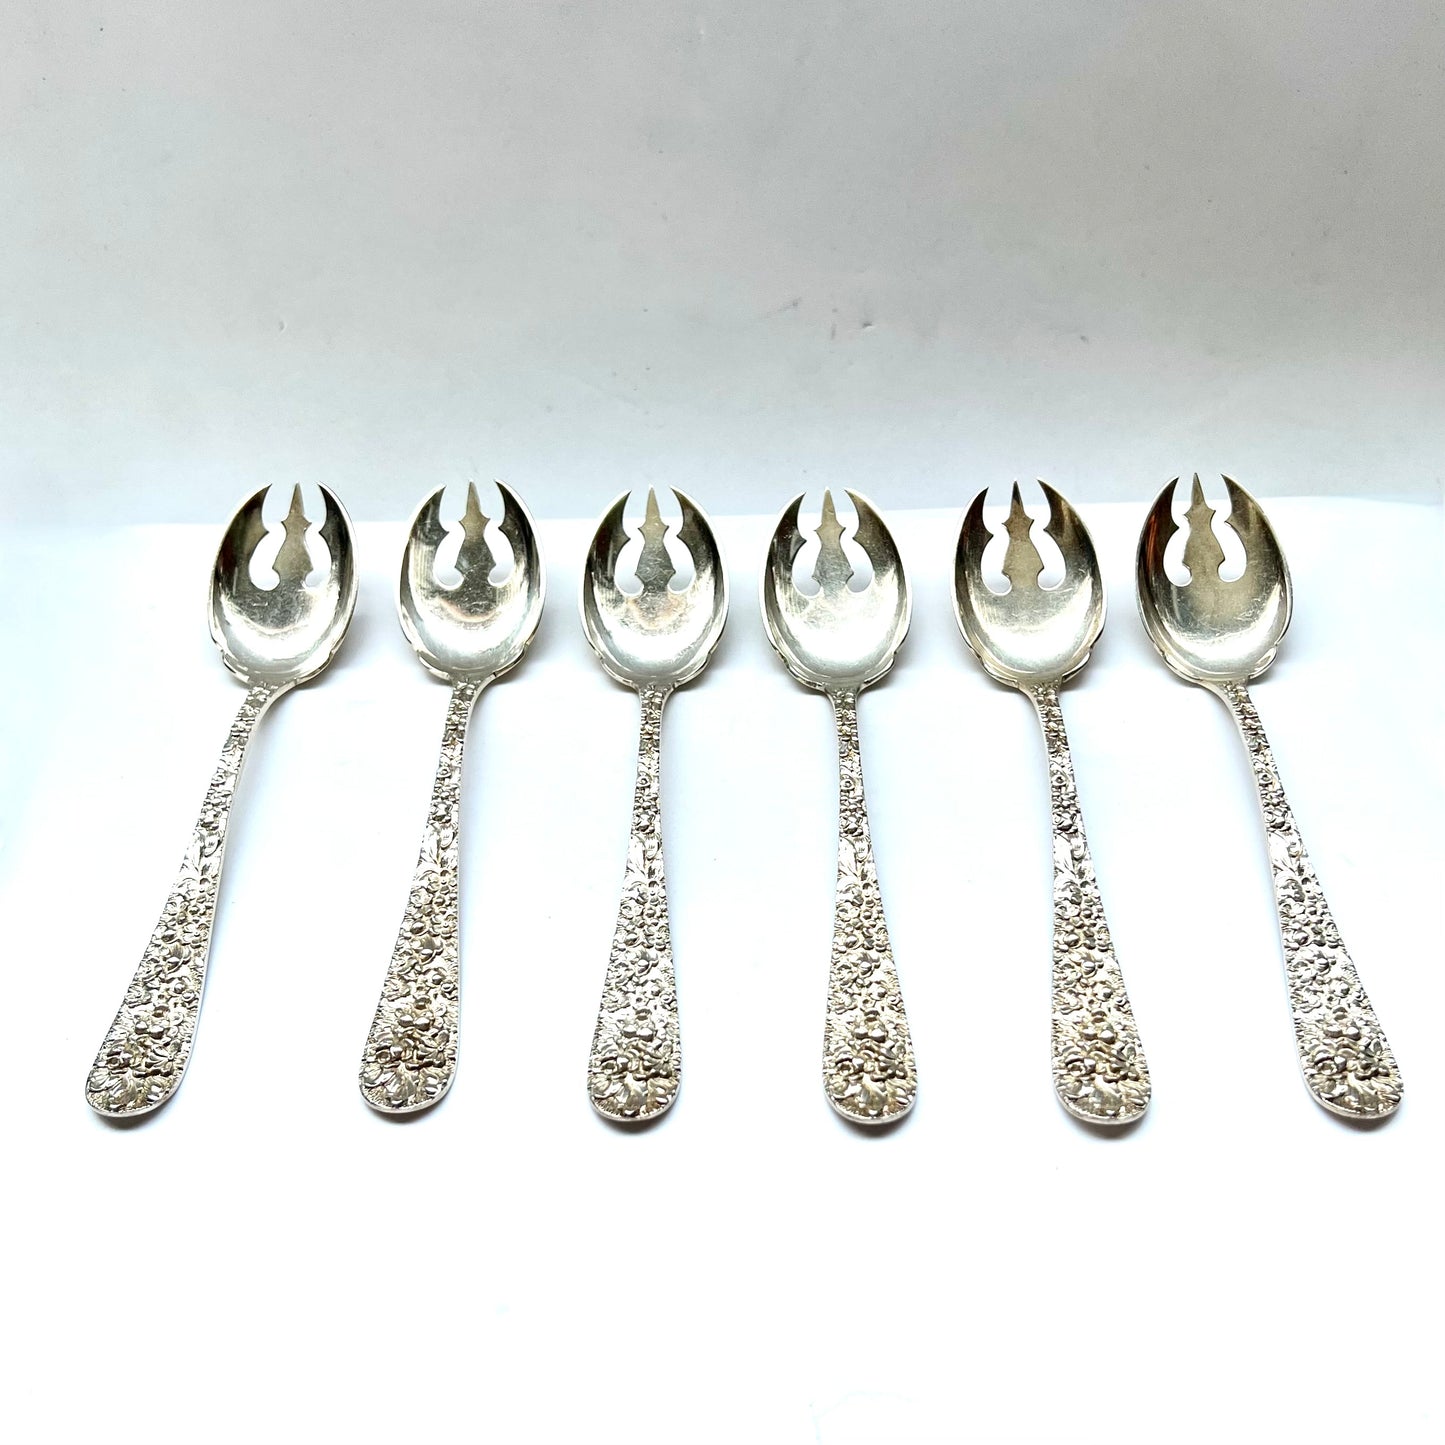 Vintage 1930s American sterling silver Rose Pattern ice cream spoons by Stieff of Baltimore, Maryland.